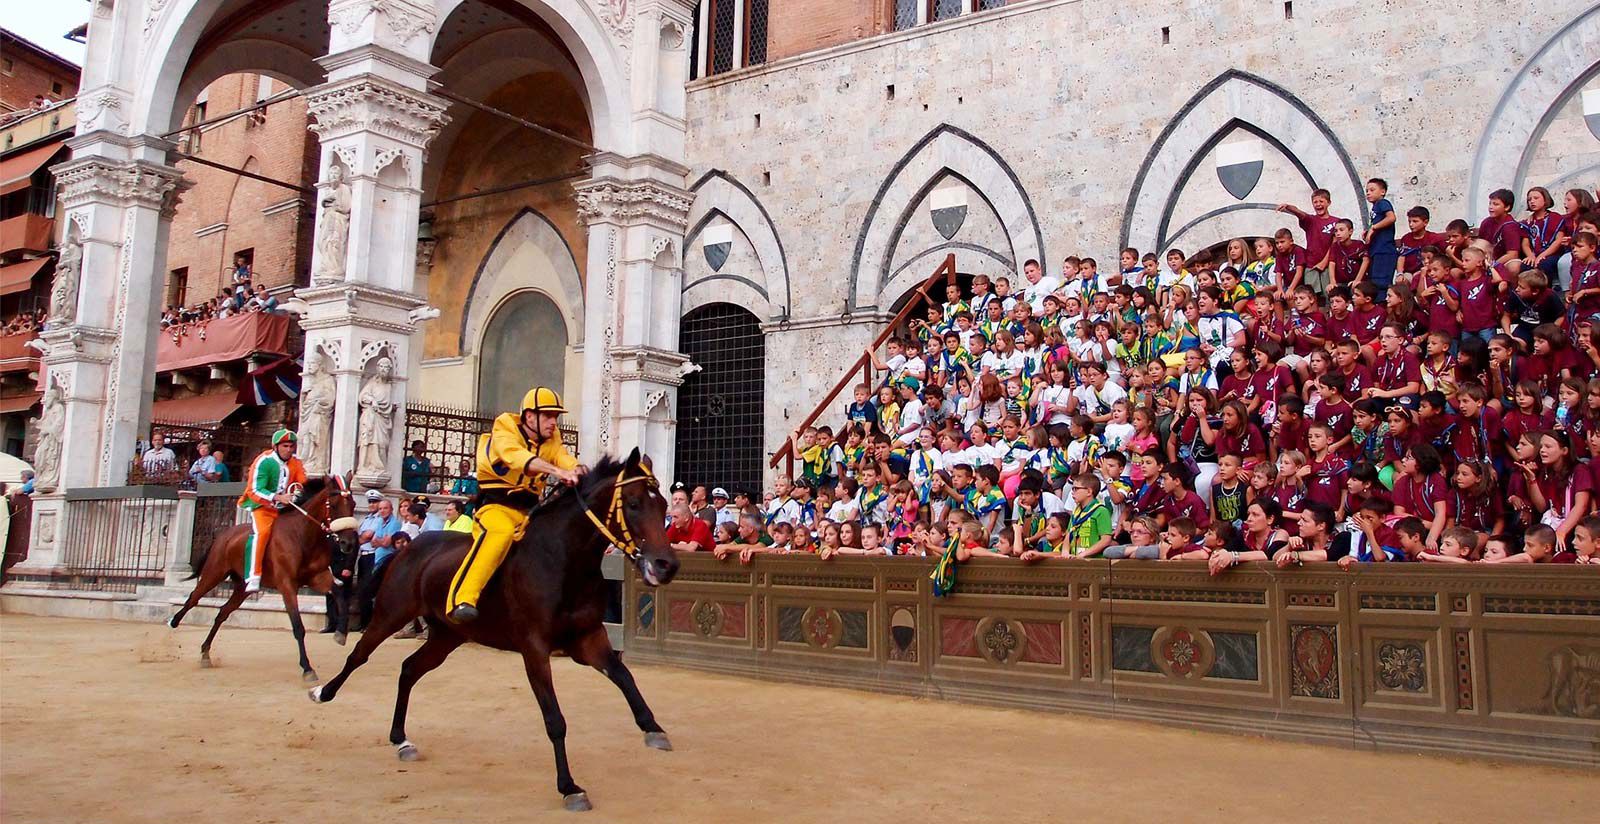 Grand Hotel Imperiale - Siena's Art and Palio 1